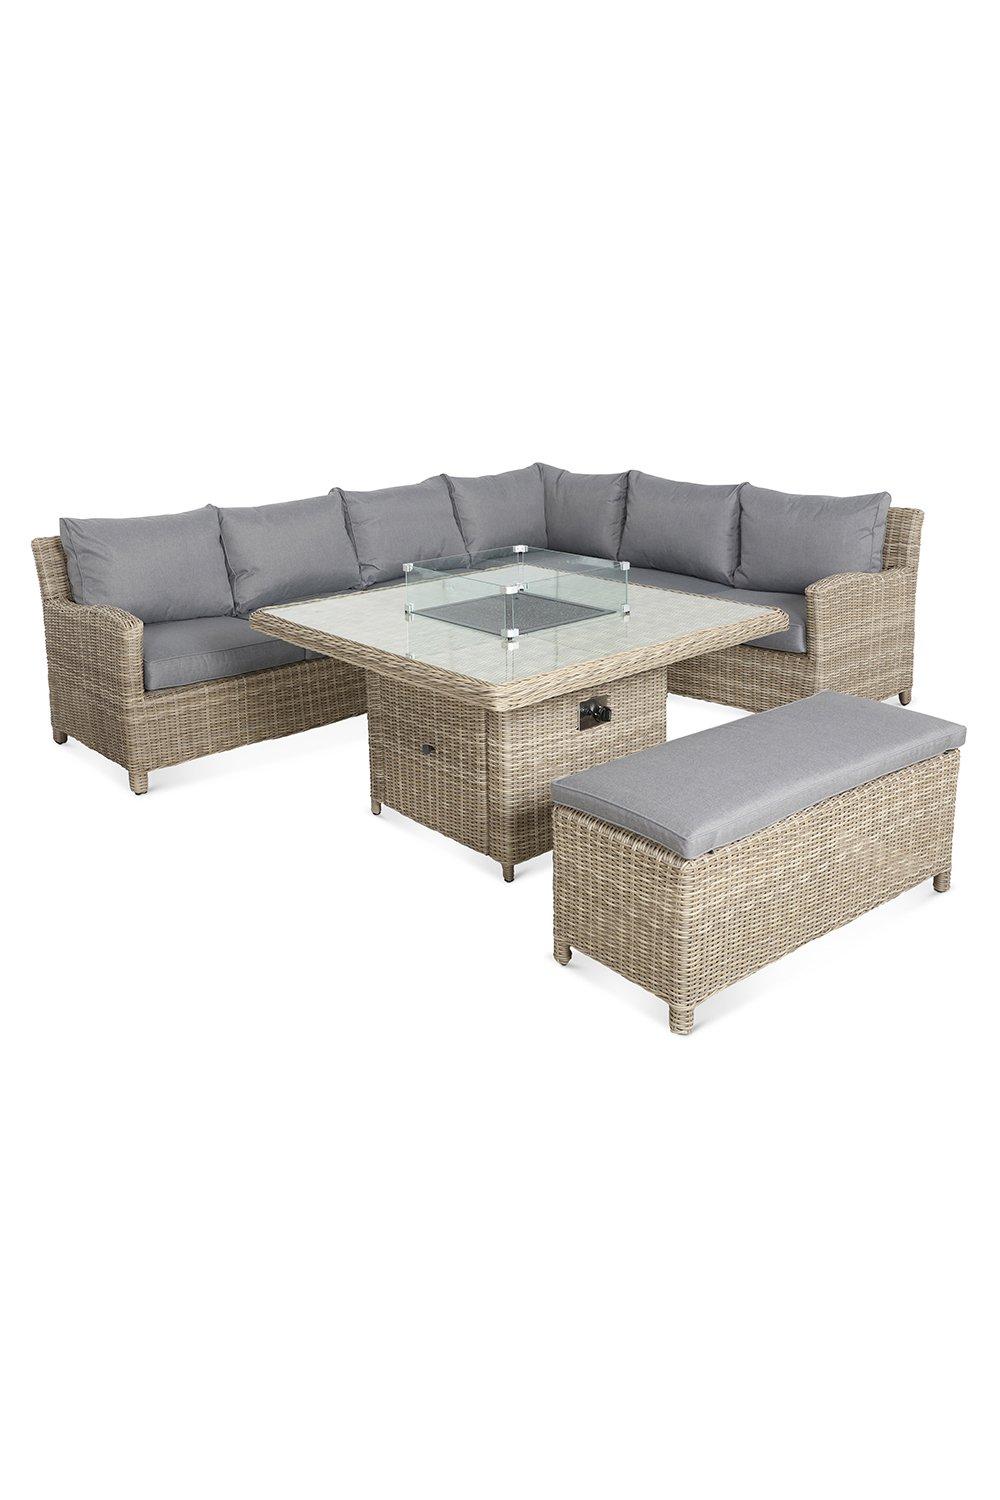 WENTWORTH 7pc Deluxe Modular square Corner Dining / Lounging Set